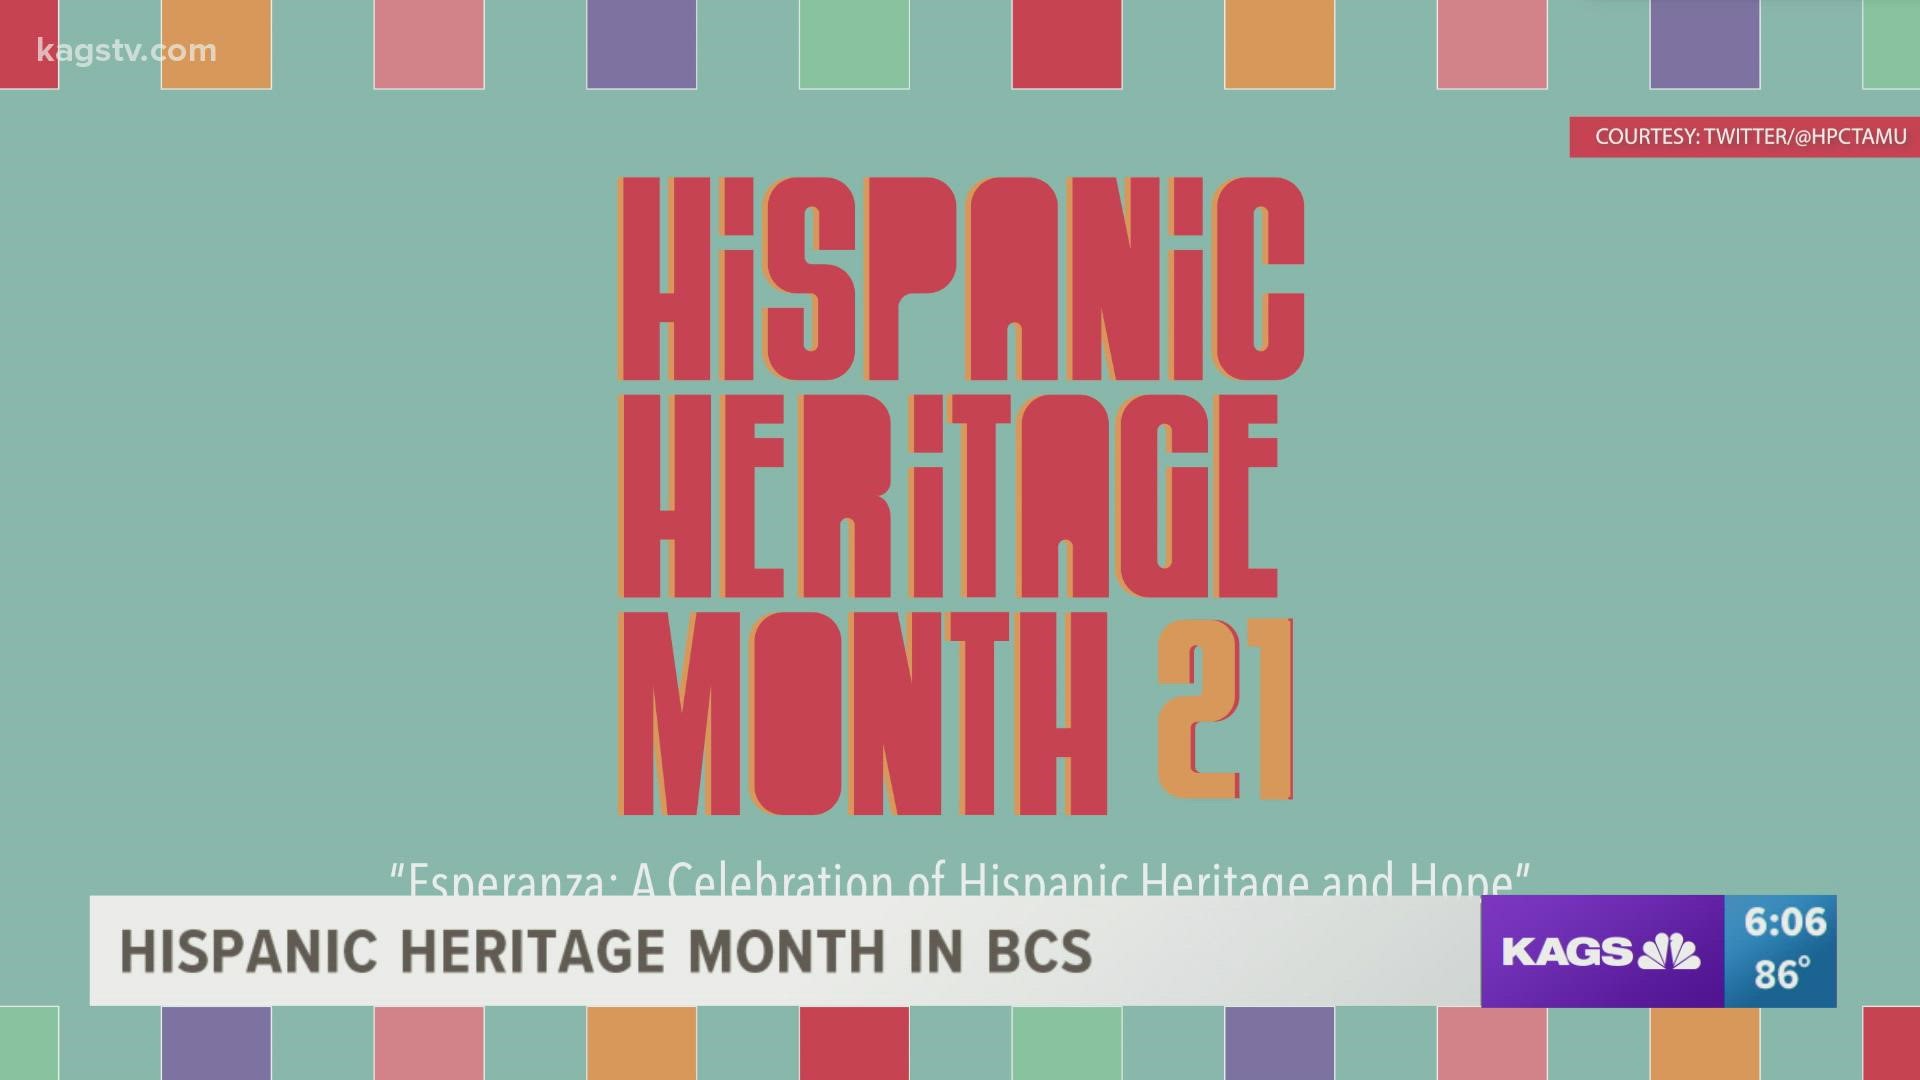 Hispanic Heritage Month takes place from Sept 15 to Oct 15